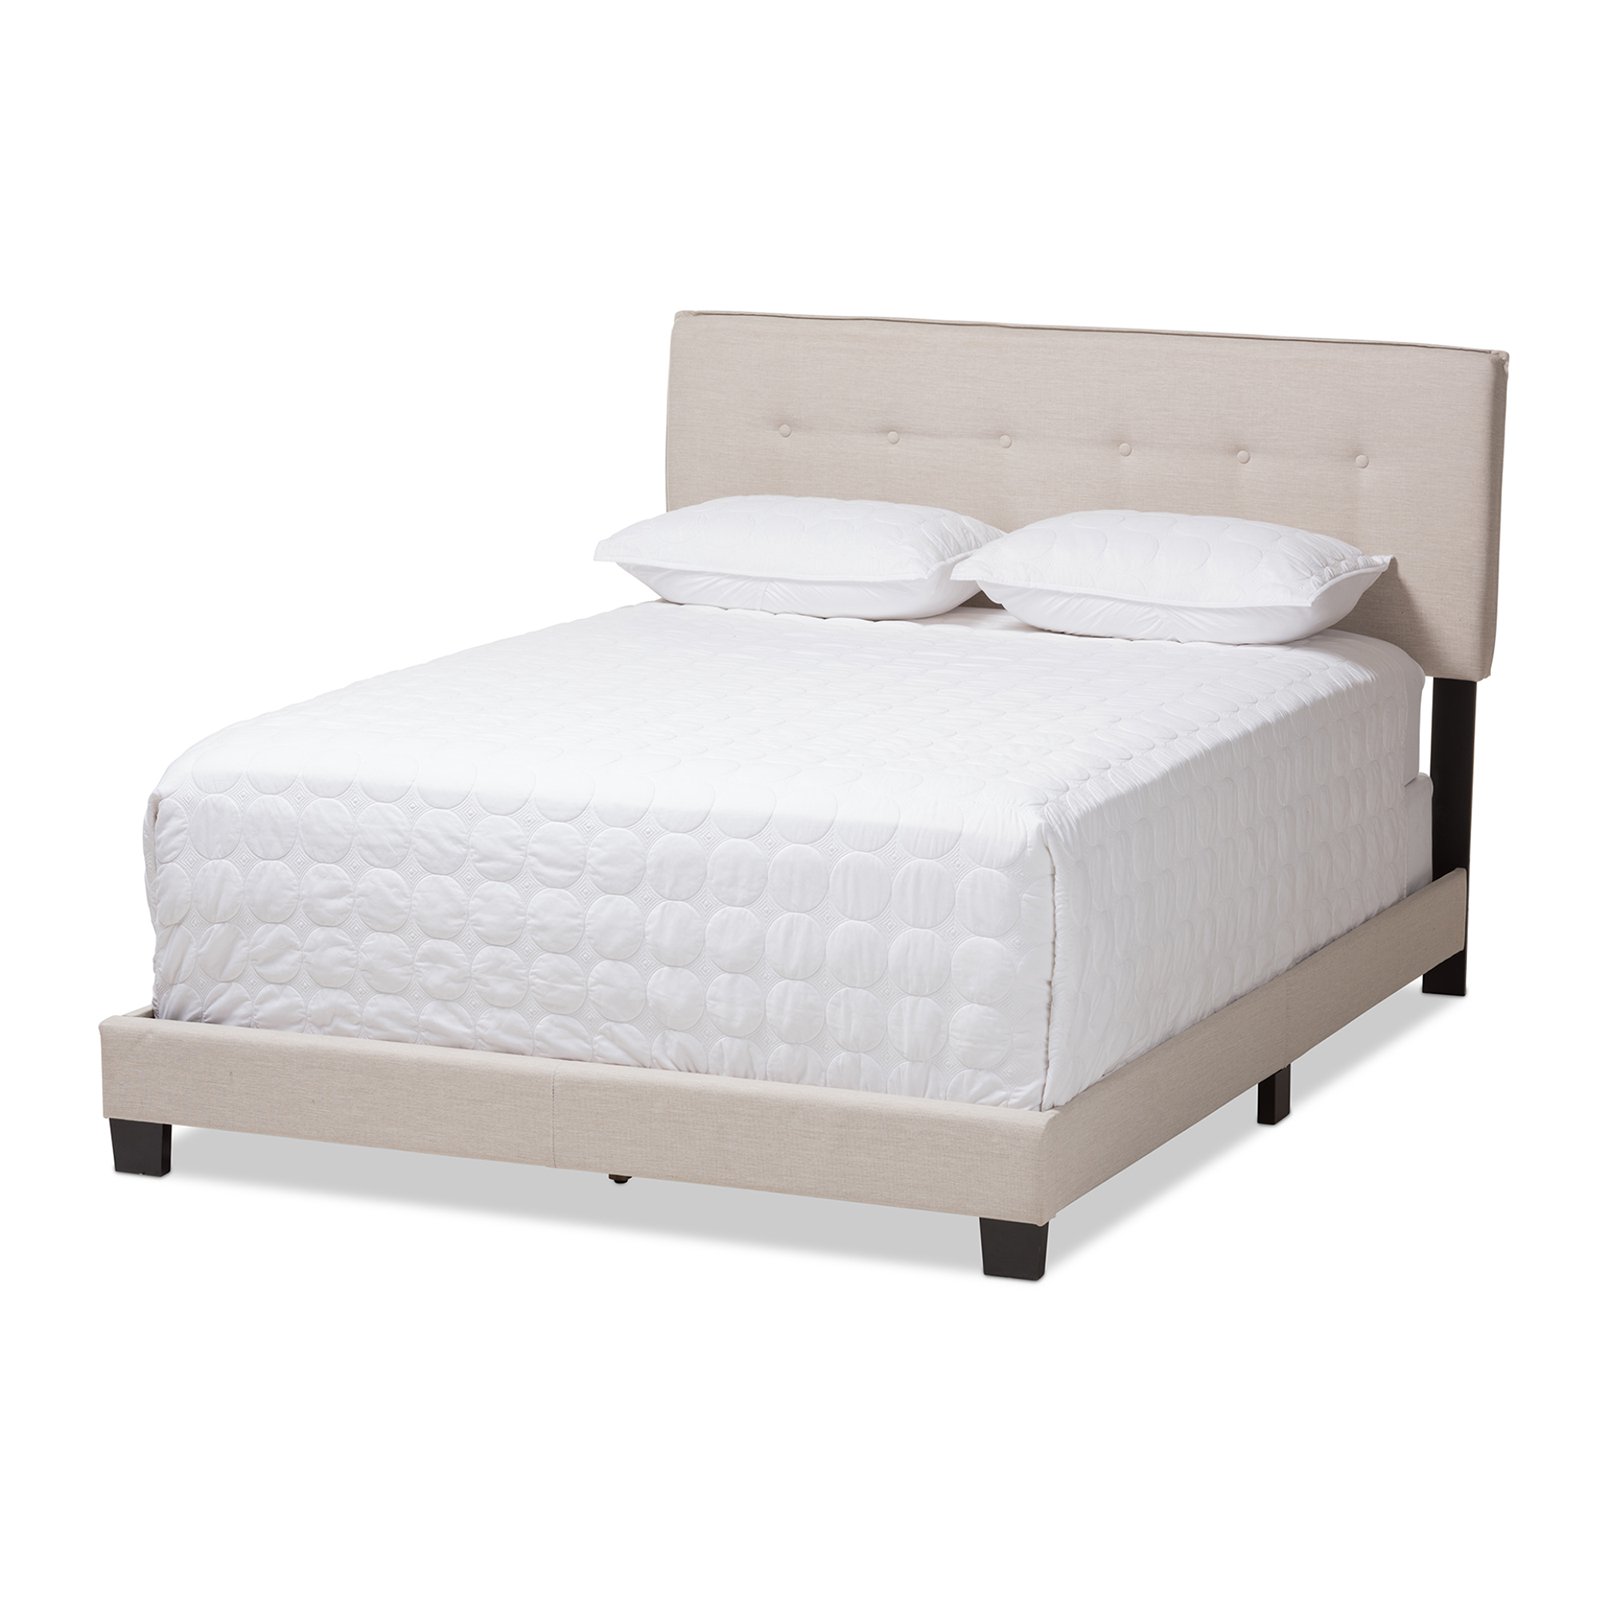 Baxton Studio Audrey Modern and Contemporary Upholstered Bed, Multiple Sizes, Multiple Colors - image 2 of 10